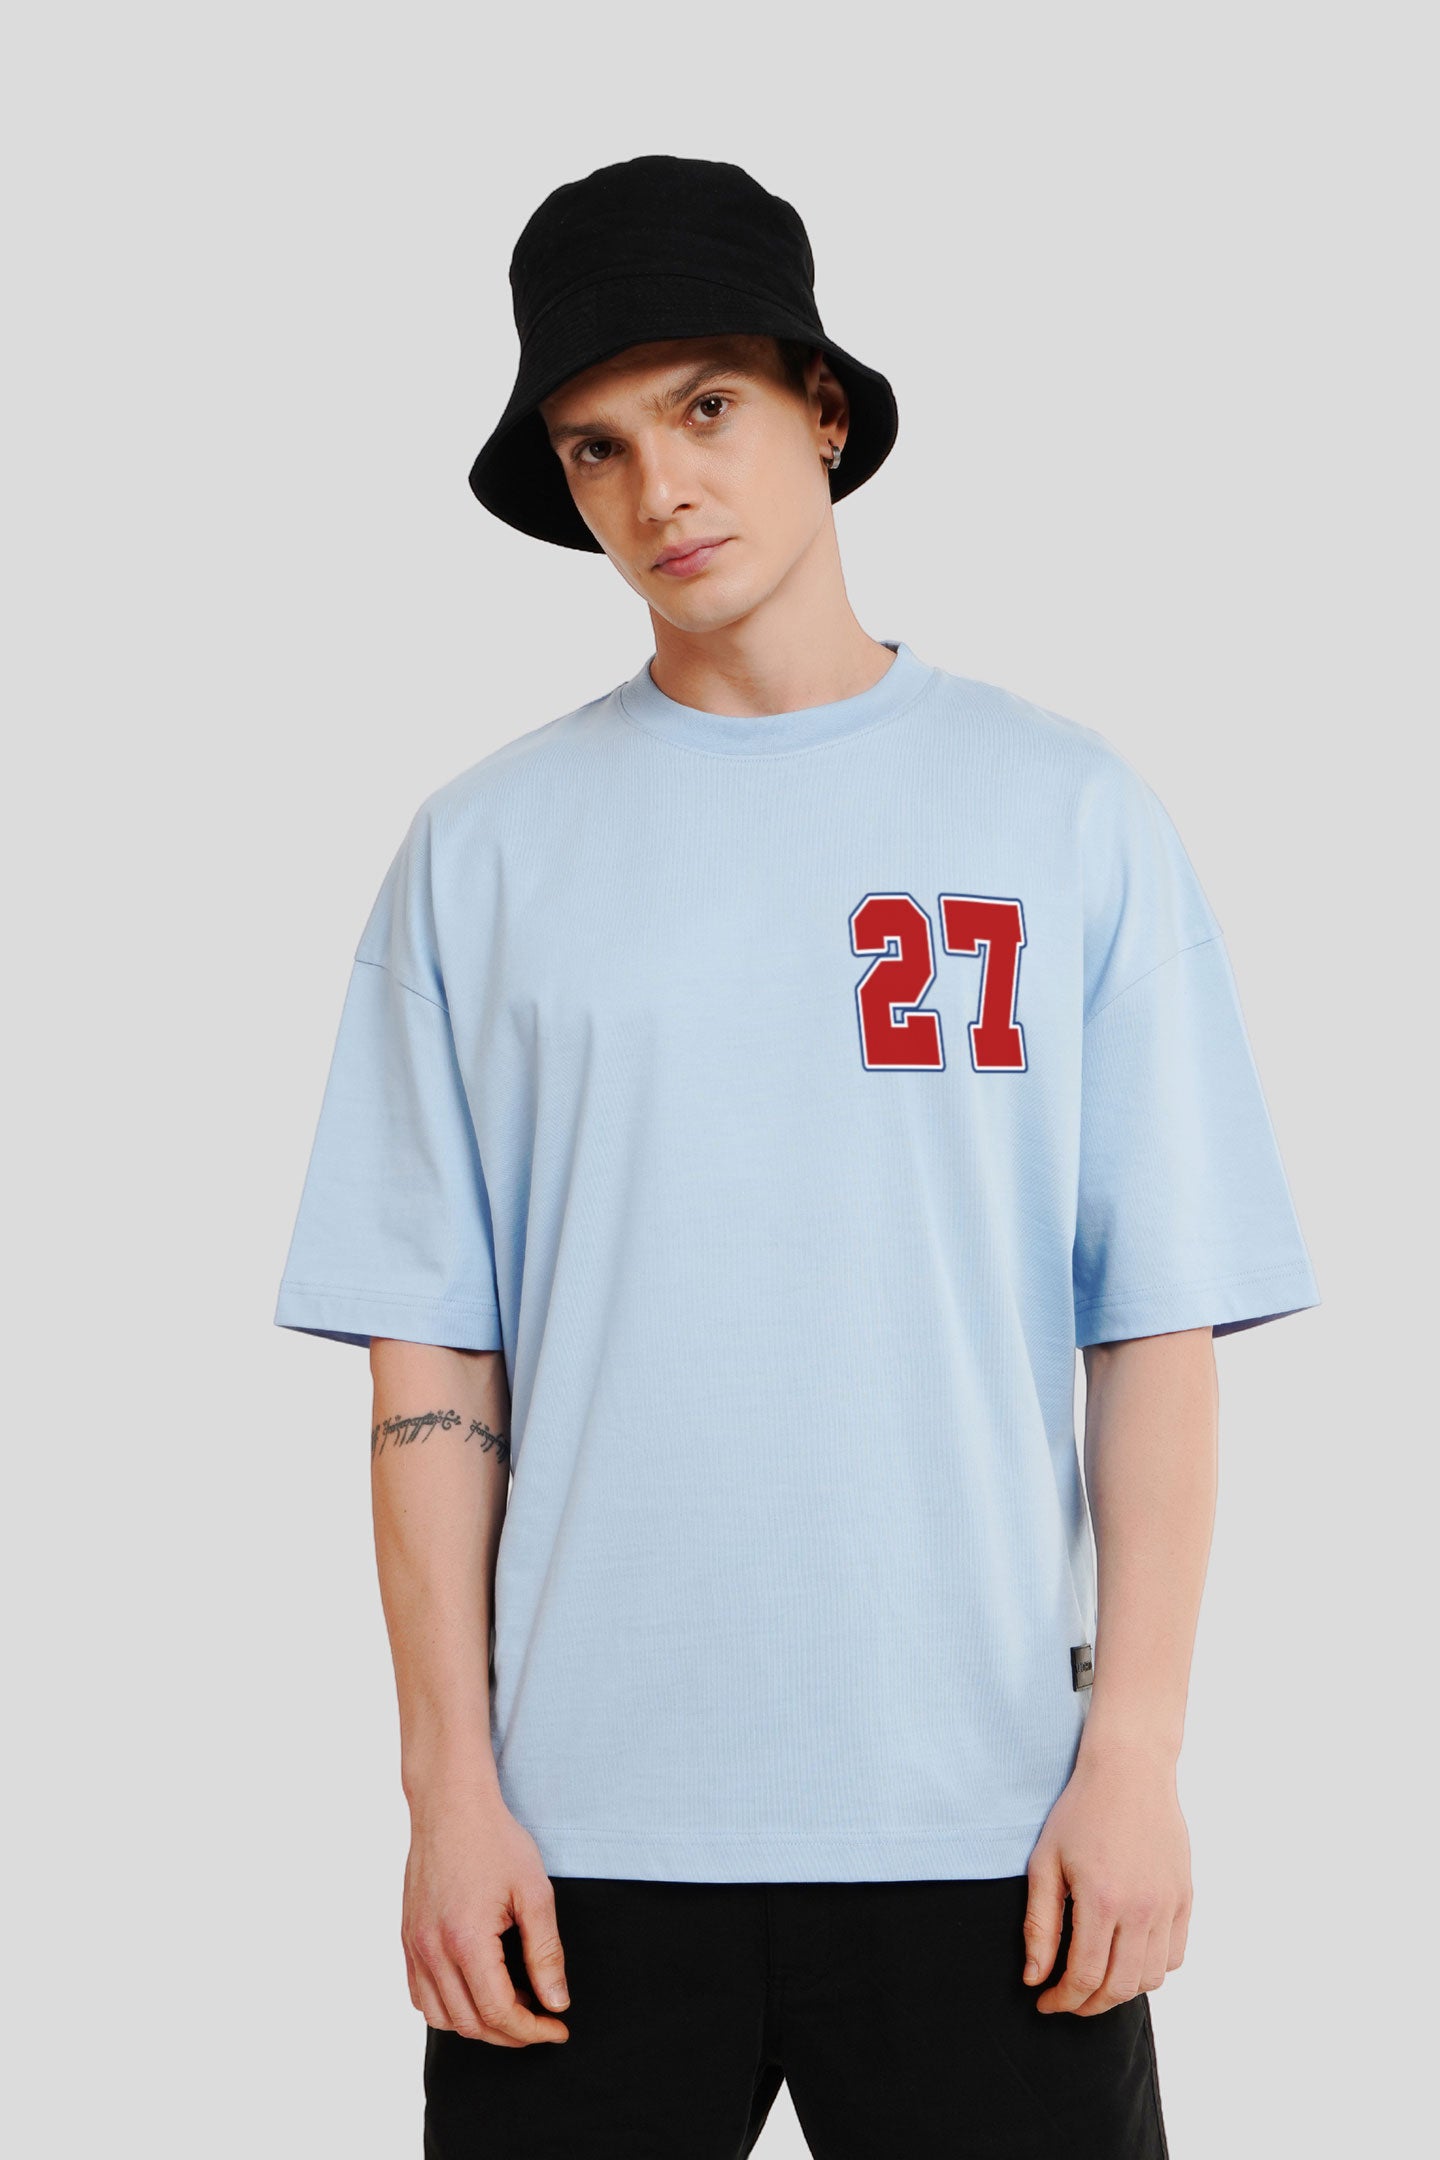 27 Powder Blue Printed T Shirt Men Baggy Fit With Front And Back Design Pic 1